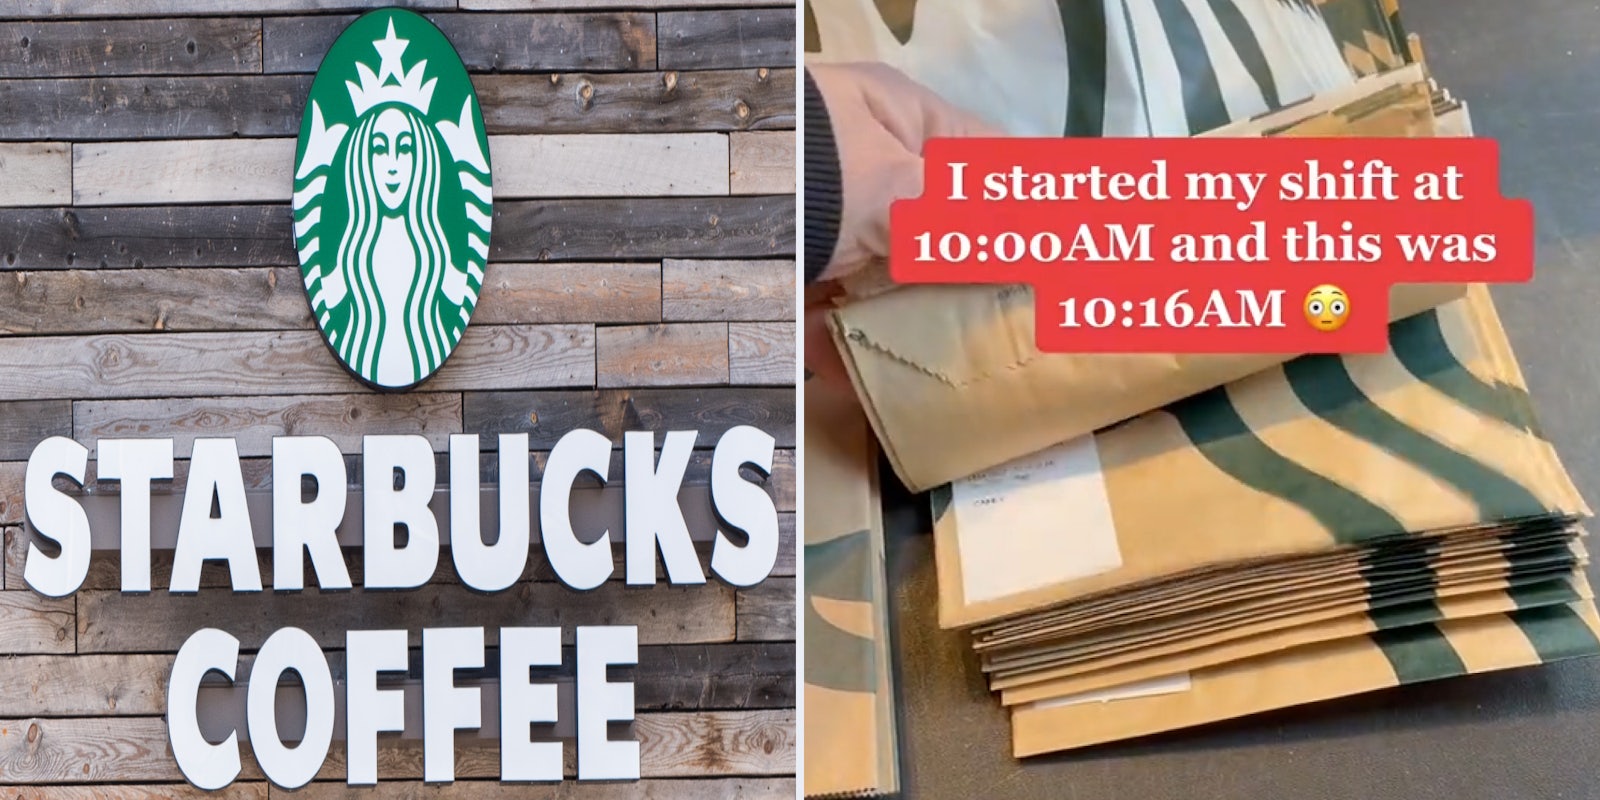 Starbucks shutterstock image (l) Starbucks worker showing orders caption 'I started my shift at 10:00 AM and this was at 10:16 AM embarrassed emoji'(r)